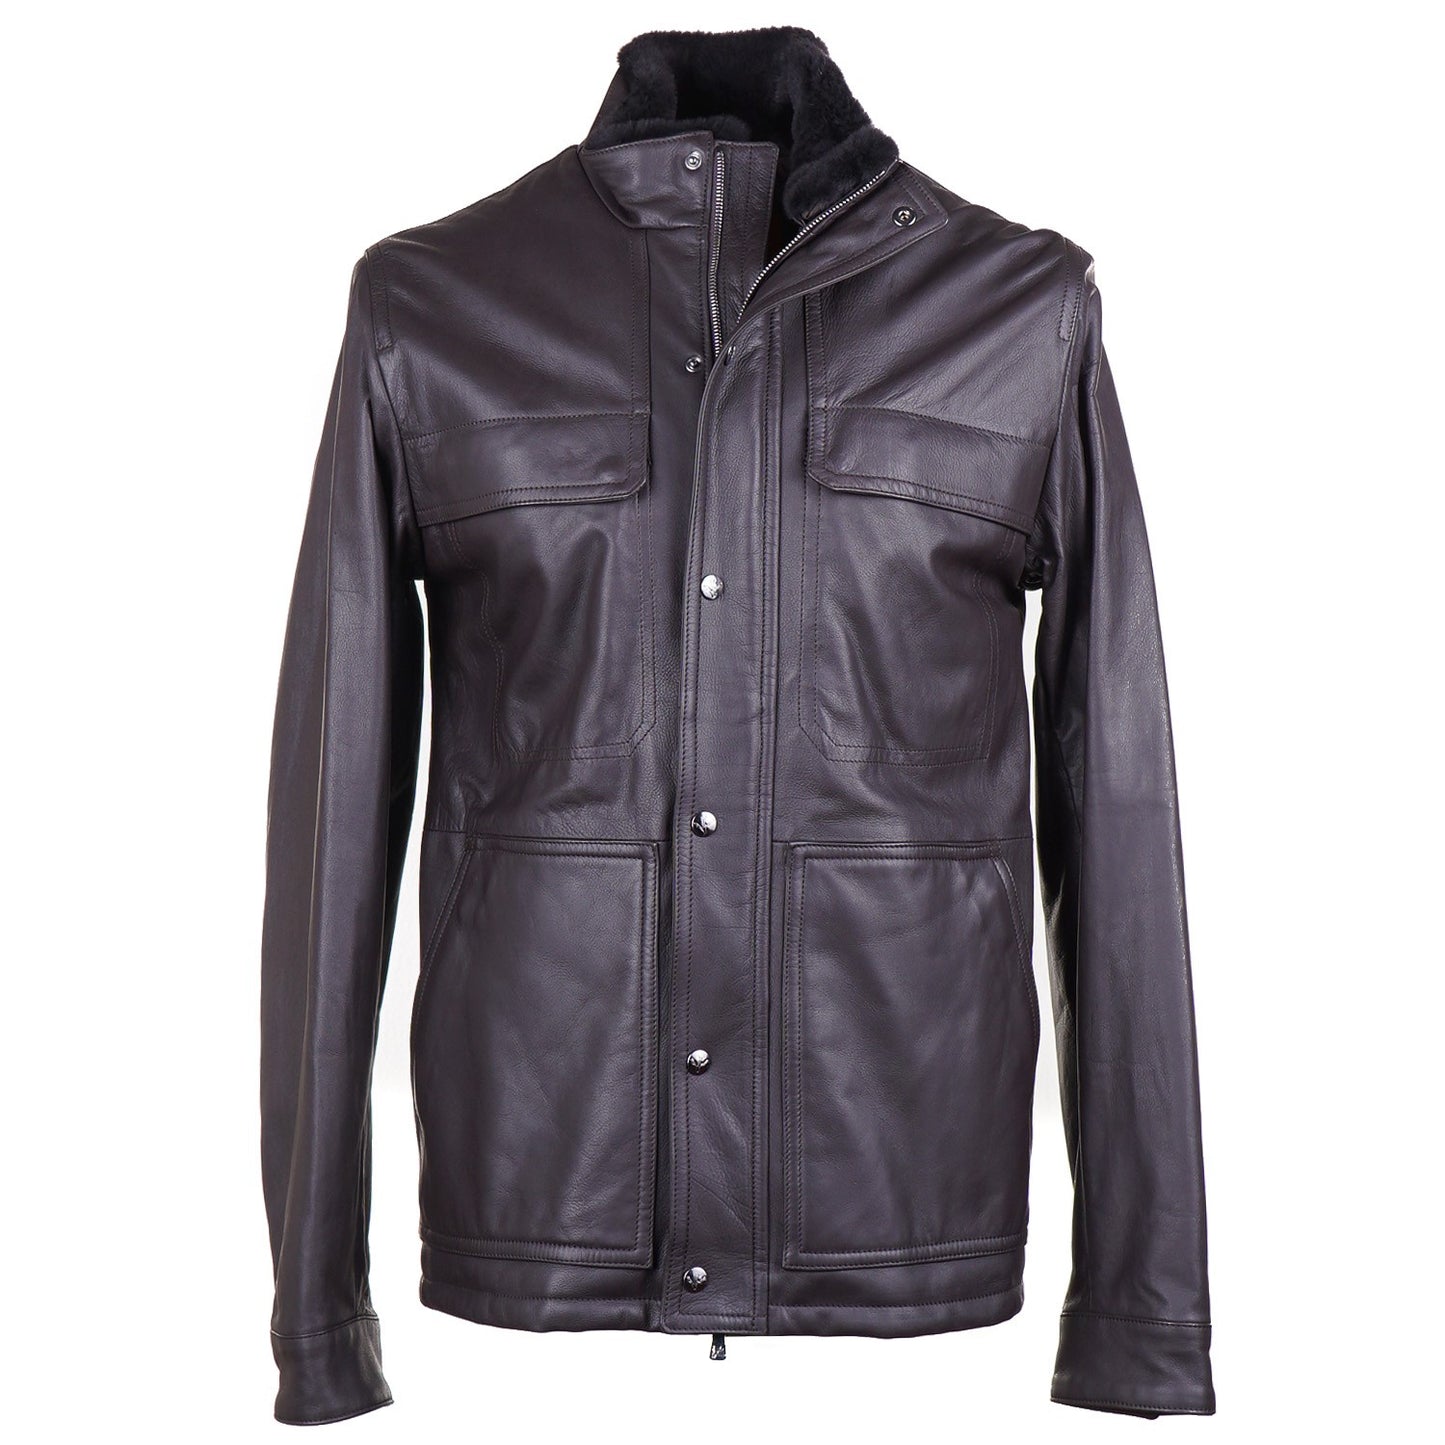 Isaia Leather Jacket with Fur Collar - Top Shelf Apparel